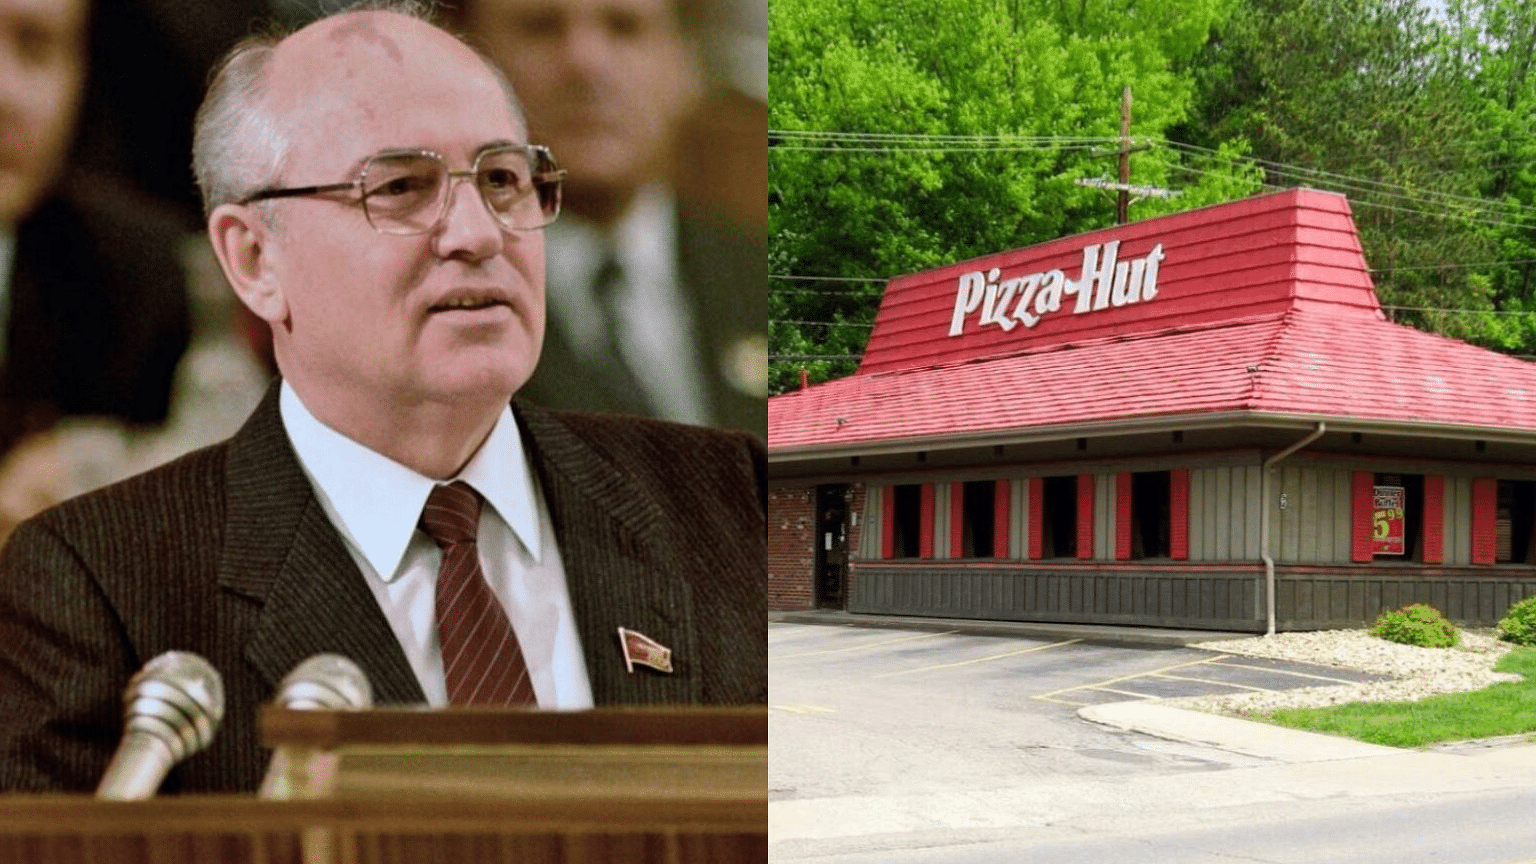 Mikhail Gorbachev appeared in a Pizza Hut commercial in 1997